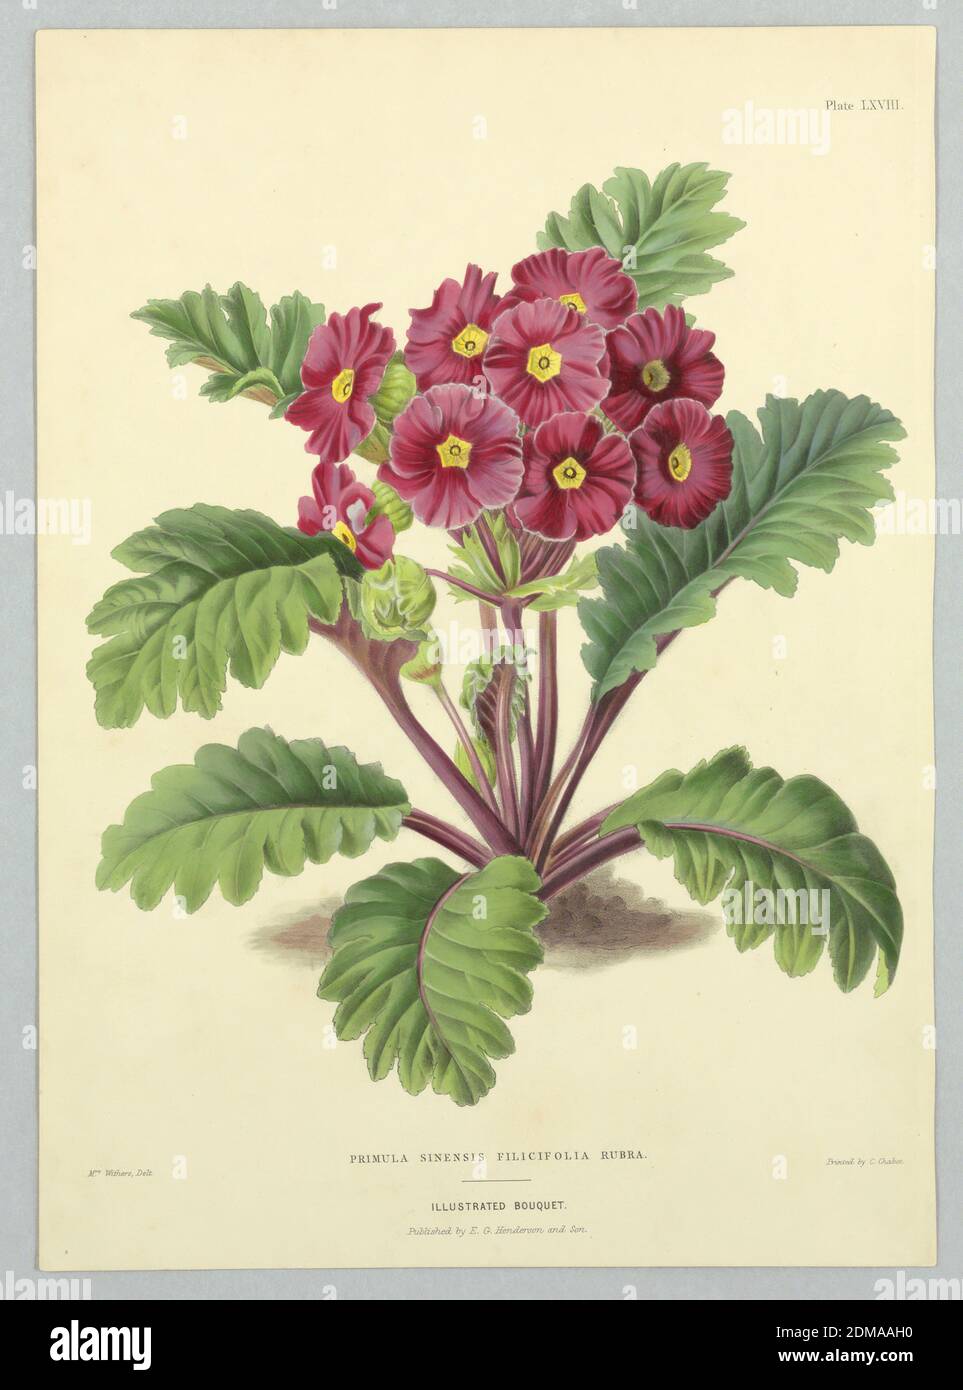 Primula Sinensis Filicifolia Rubra, Plate LXVIII from Edward George Henderson's 'The Illustrated Bouquet', E. G. Henderson and Son, English, ca. 1859 - 1886, Mrs. Withers, English, active 19th c., Chromolithograph on paper, Primula Sinensis Filicifolia Rubra, Plate LXVIII from Edward George Henderson's 'The Illustrated Bouquet.', London, England, ca. 1857–1864, Print Stock Photo